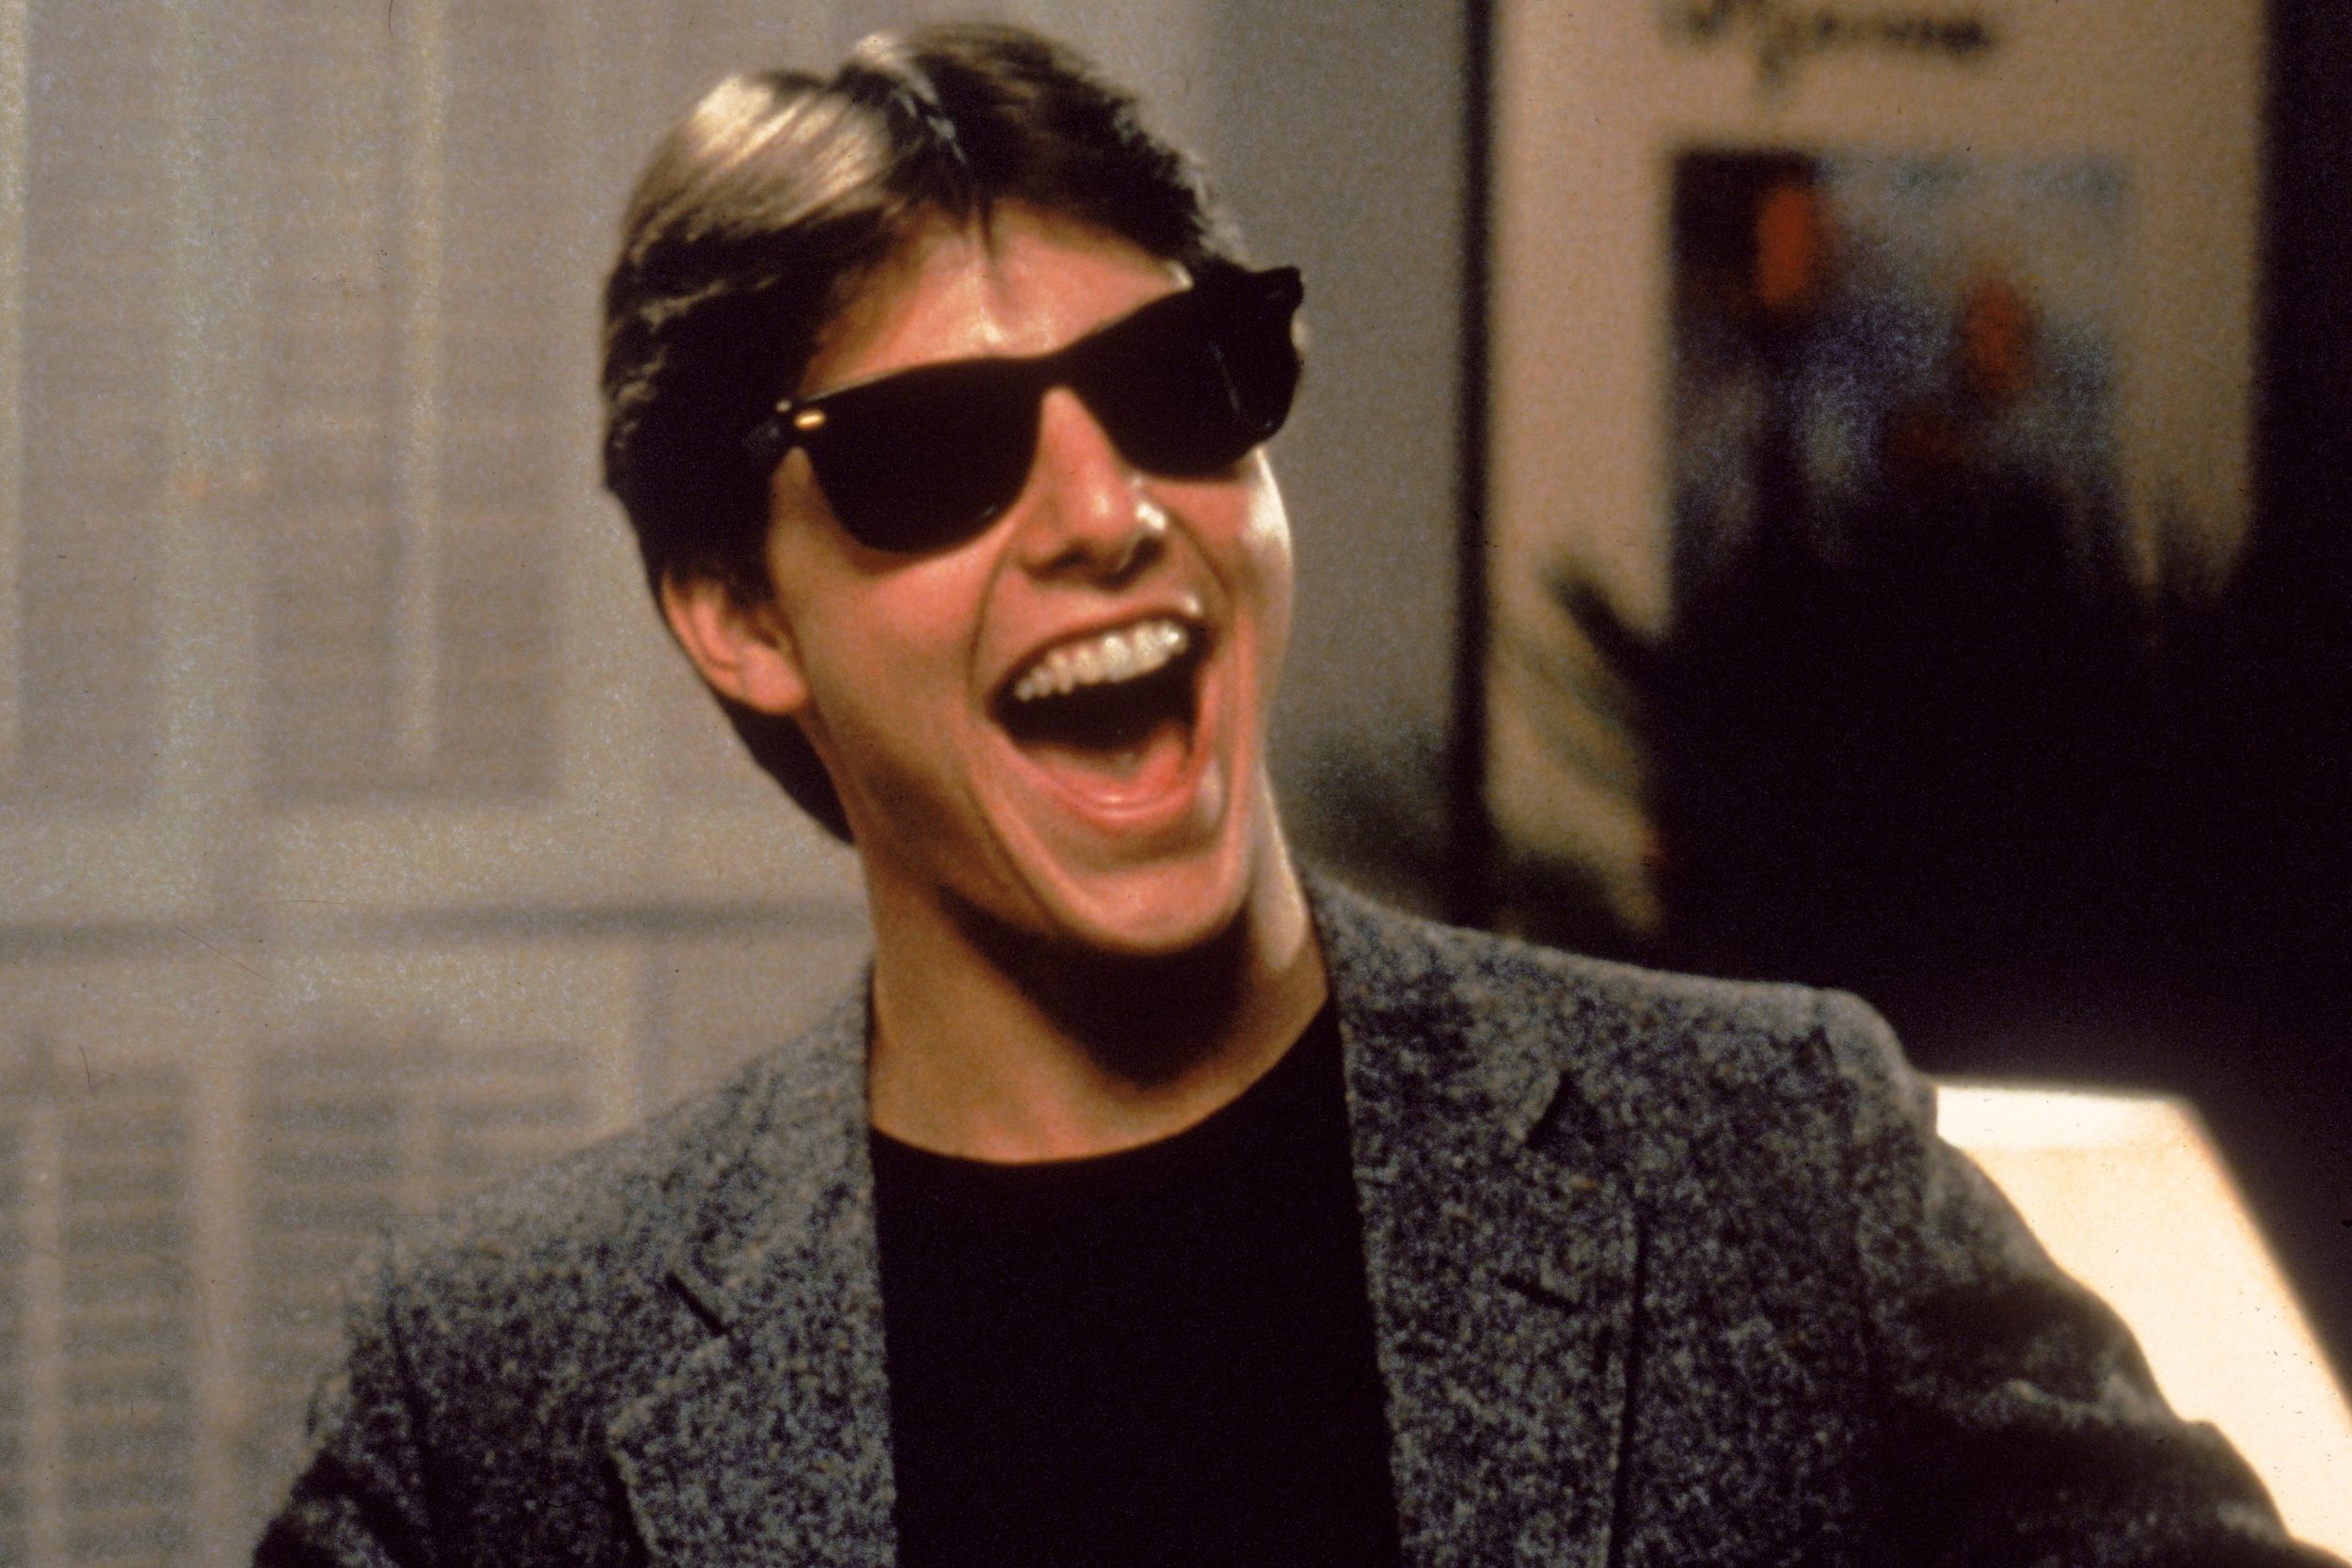 <p>One of the first films in Tom Cruise’s rise to superstardom, <em>Risky Business</em> sees Cruise playing the kind of character he would eventually eschew: sleazy, sketchy, and mostly unlikeable. Back then, he was totally cool with playing somebody like Joel Goodson. Joel opens the film by saying, “The dream is always the same.” Now, he goes on to discuss a specific dream, but honestly, at the moment, that line can be taken broadly, it really is evocative.</p><p>You may also like: <a href='https://www.yardbarker.com/entertainment/articles/the_20_most_terrifying_killers_in_non_horror_movies_121123/s1__39230027'>The 20 most terrifying killers in non-horror movies</a></p>